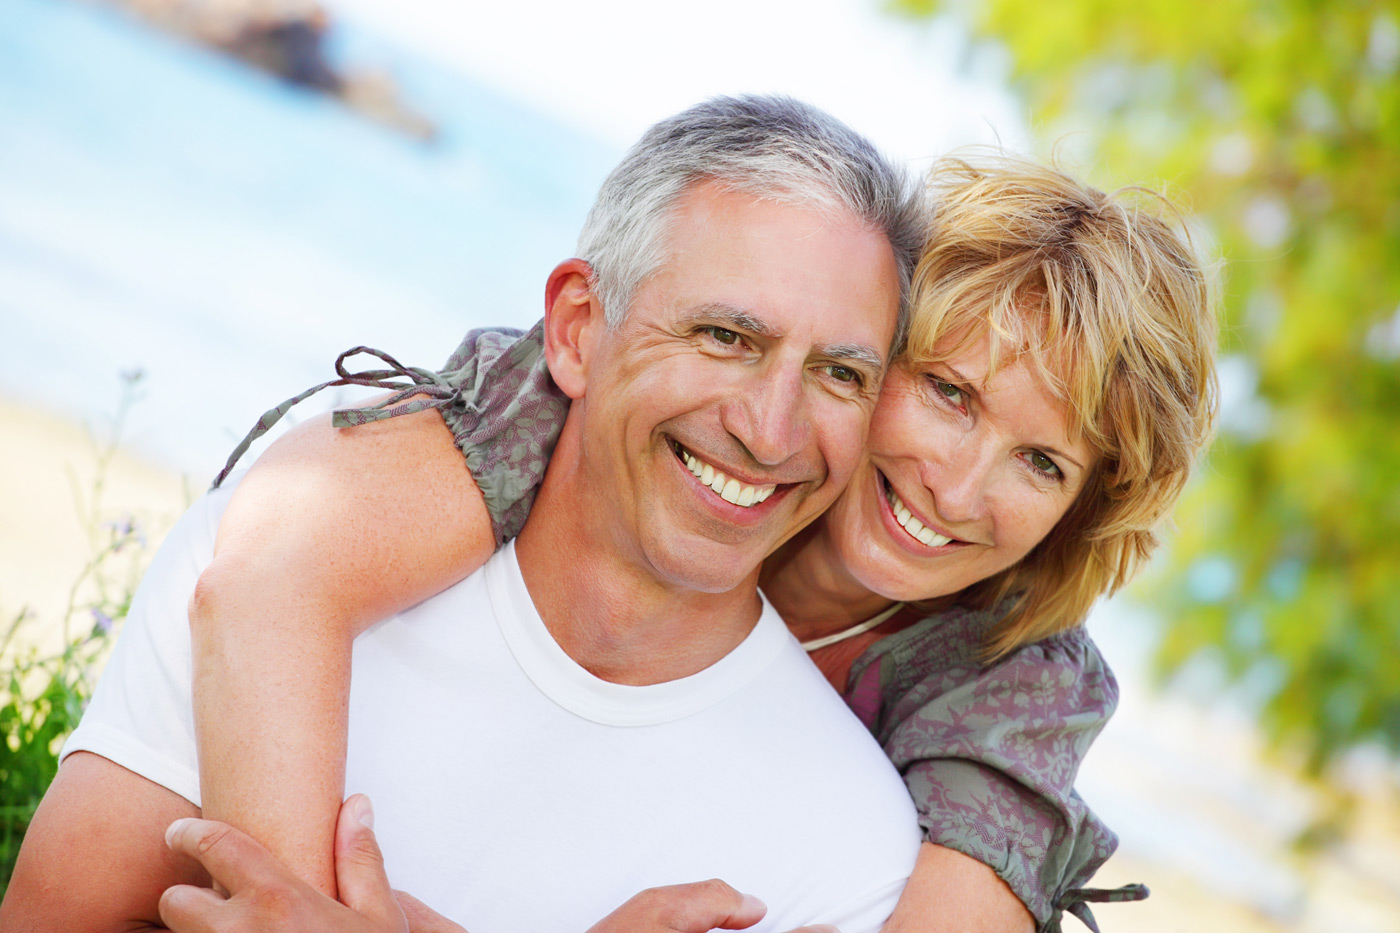 A smiling couple showing off their healthy teeth, radiating happiness in an outdoor setting.